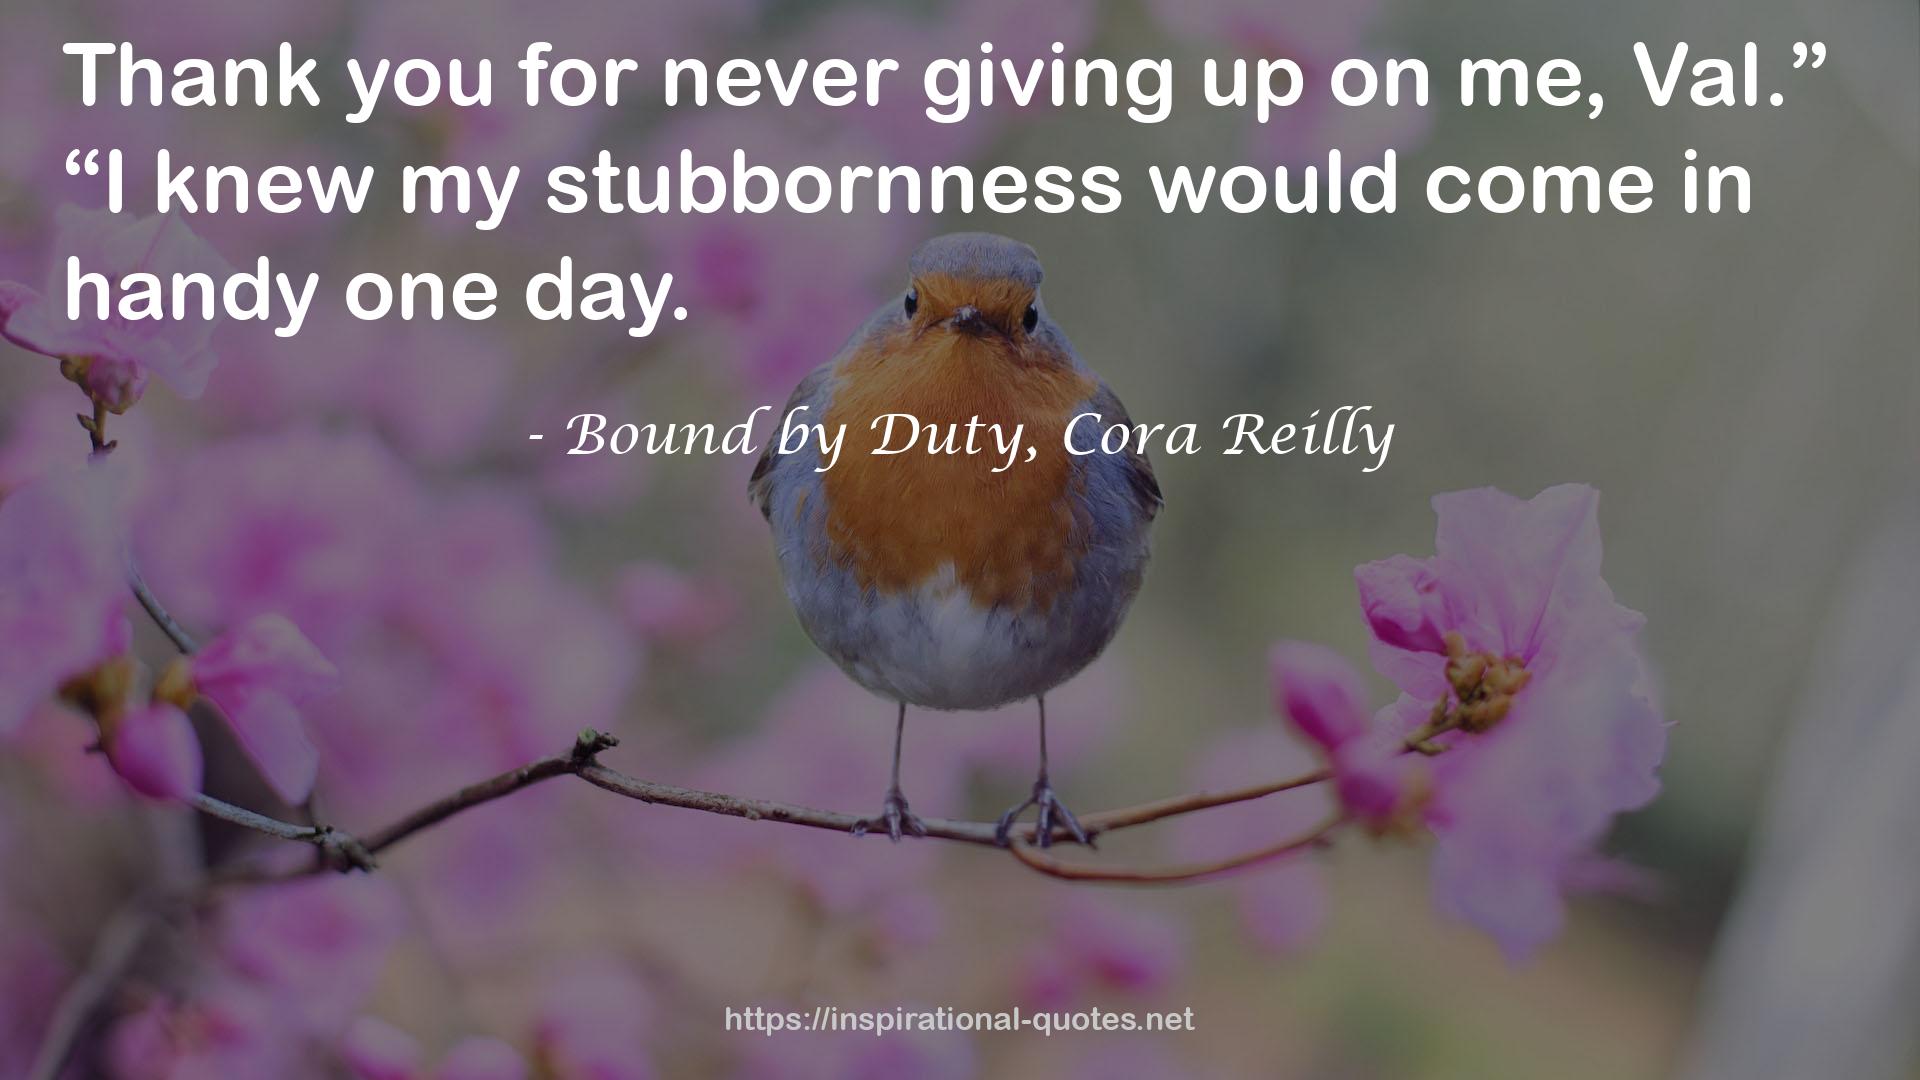 Bound by Duty, Cora Reilly QUOTES